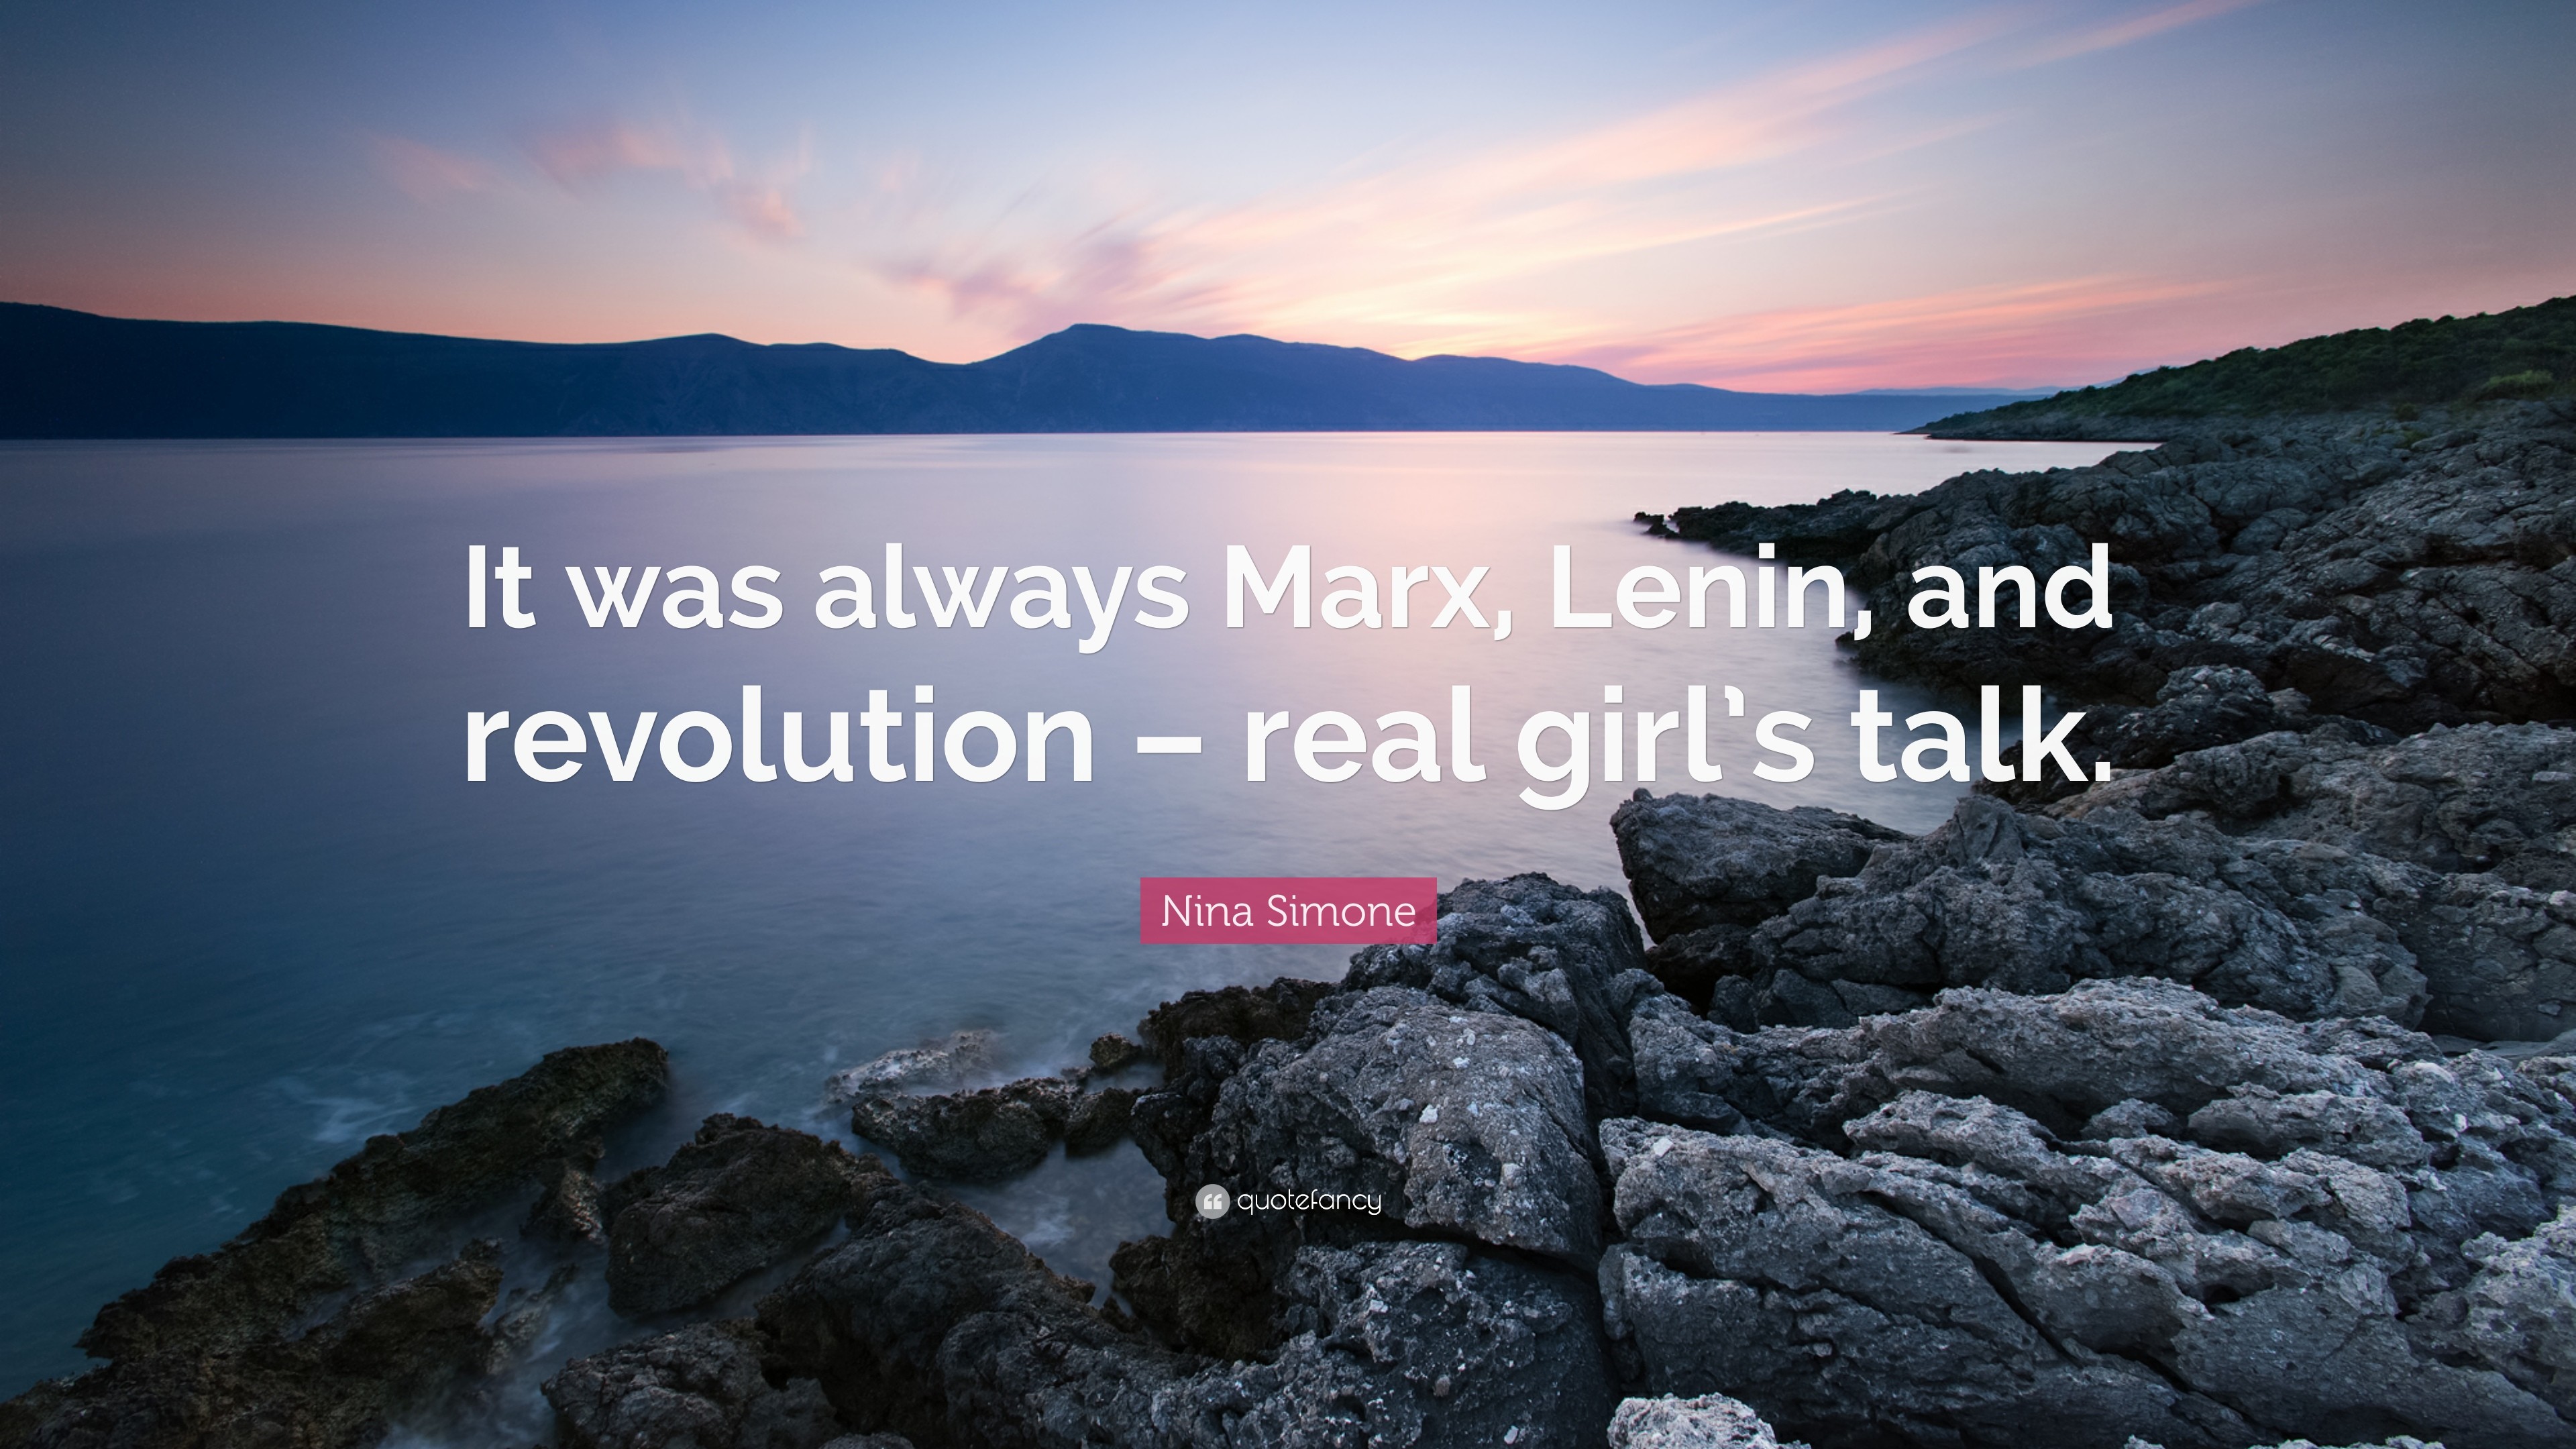 3840x2160 Nina Simone Quote: “It was always Marx, Lenin, and revolution – real